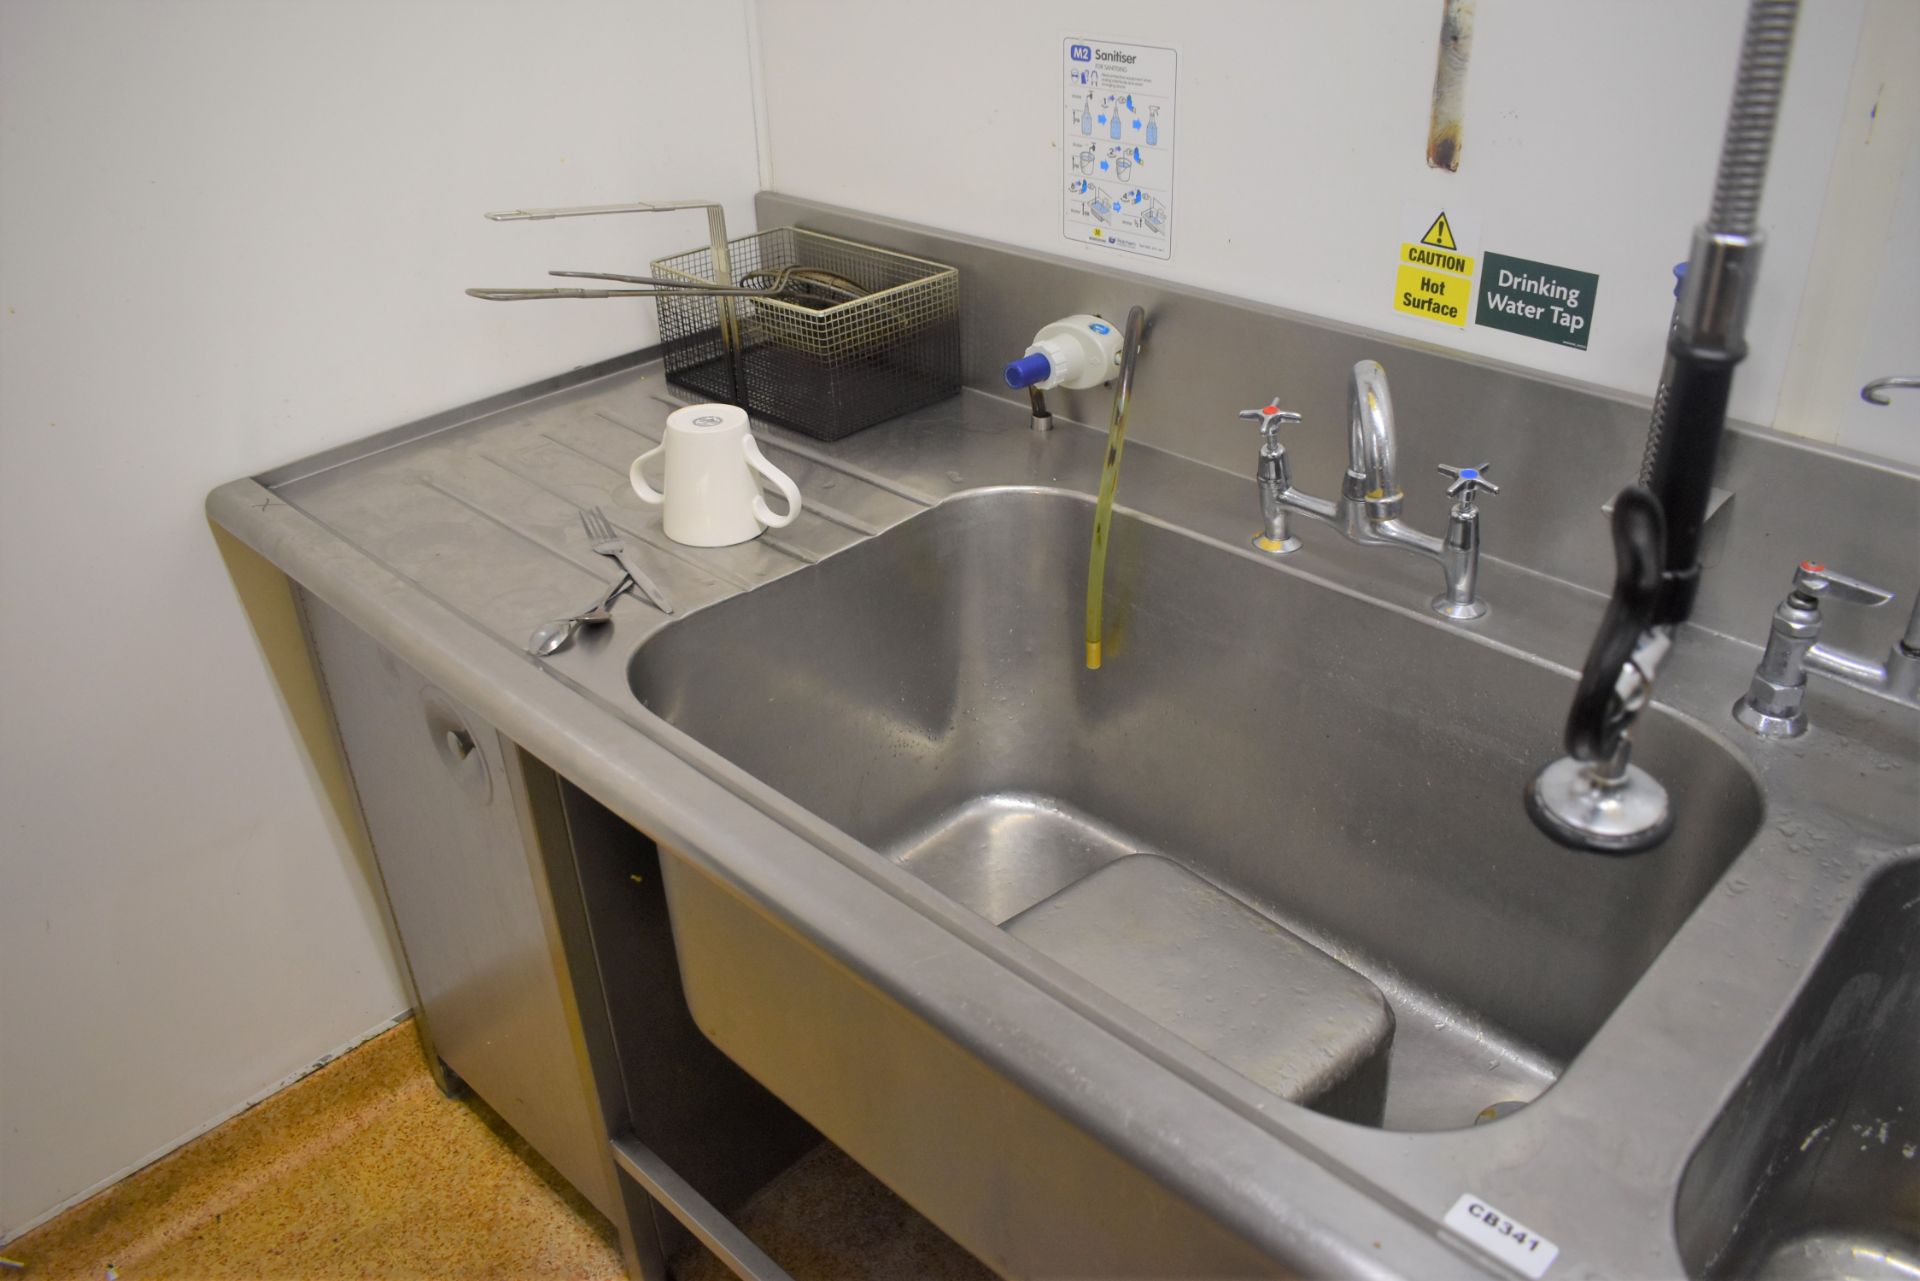 1 x Large Commercial Kitchen Wash Unit With Large Twin Sink Basins, Storage Cupboard, Mixer Taps, - Image 3 of 8